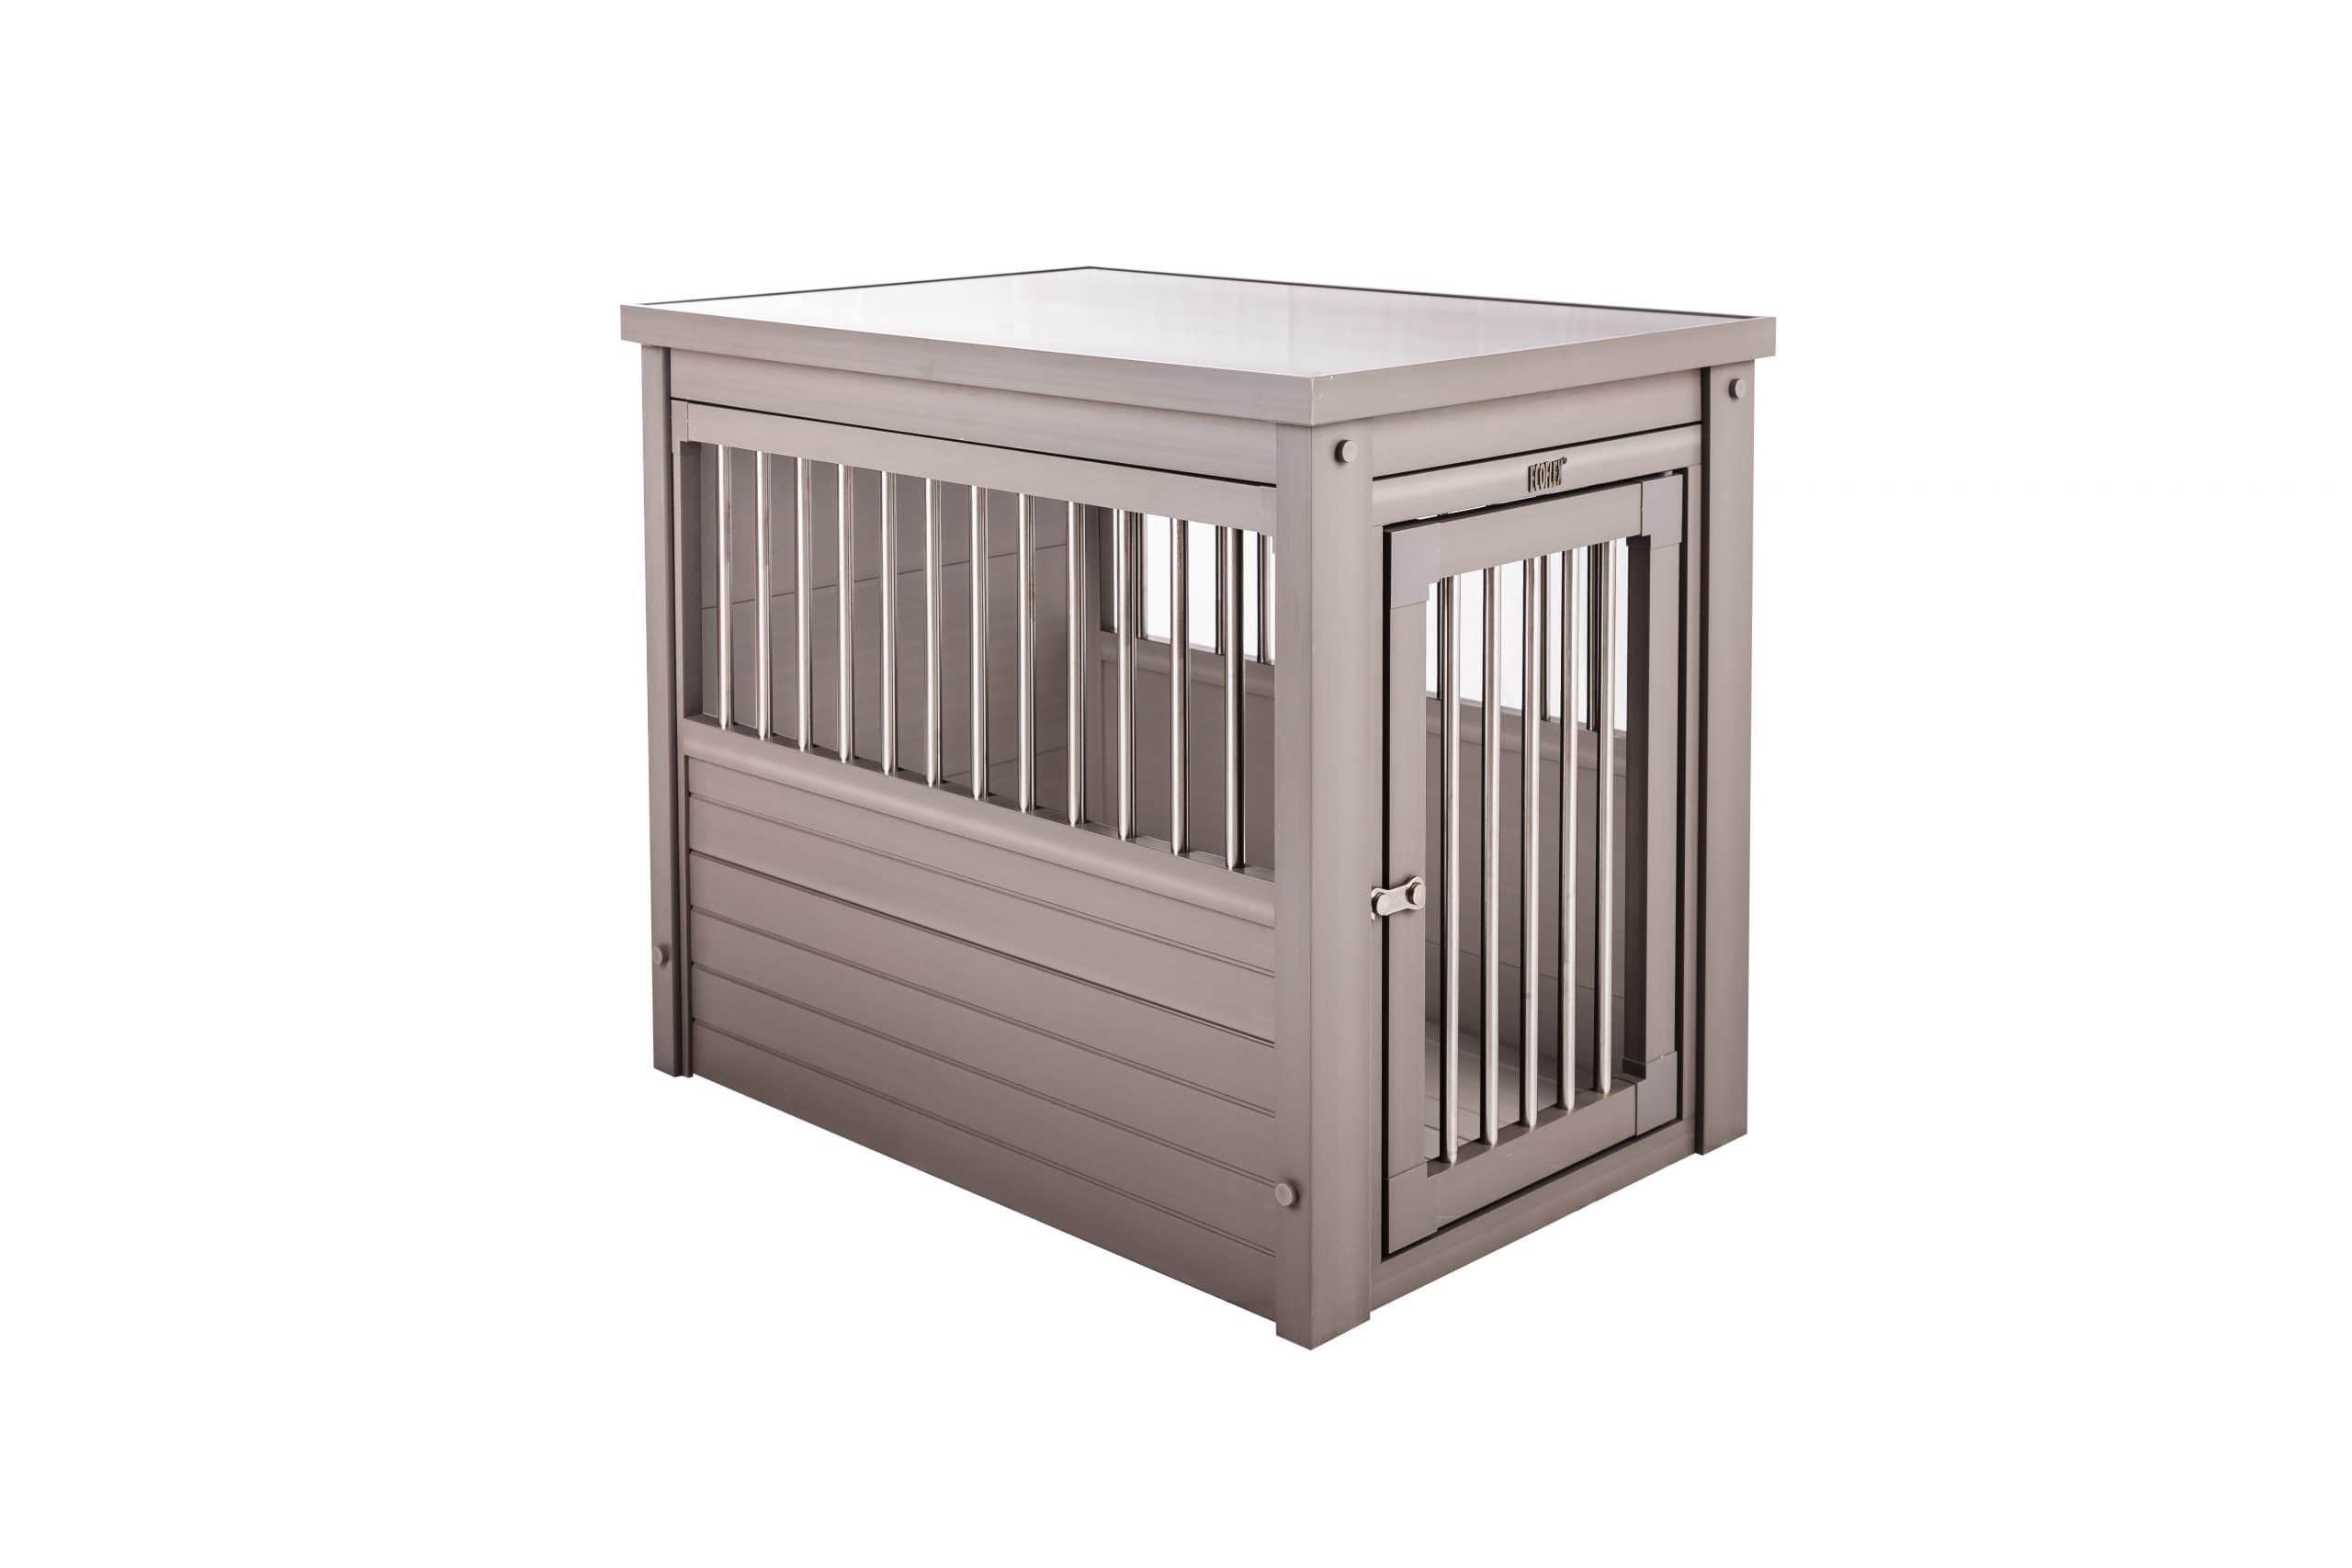 New Age Pet InnPlace Dog Crate with Stainless Steel Spindles Top Side